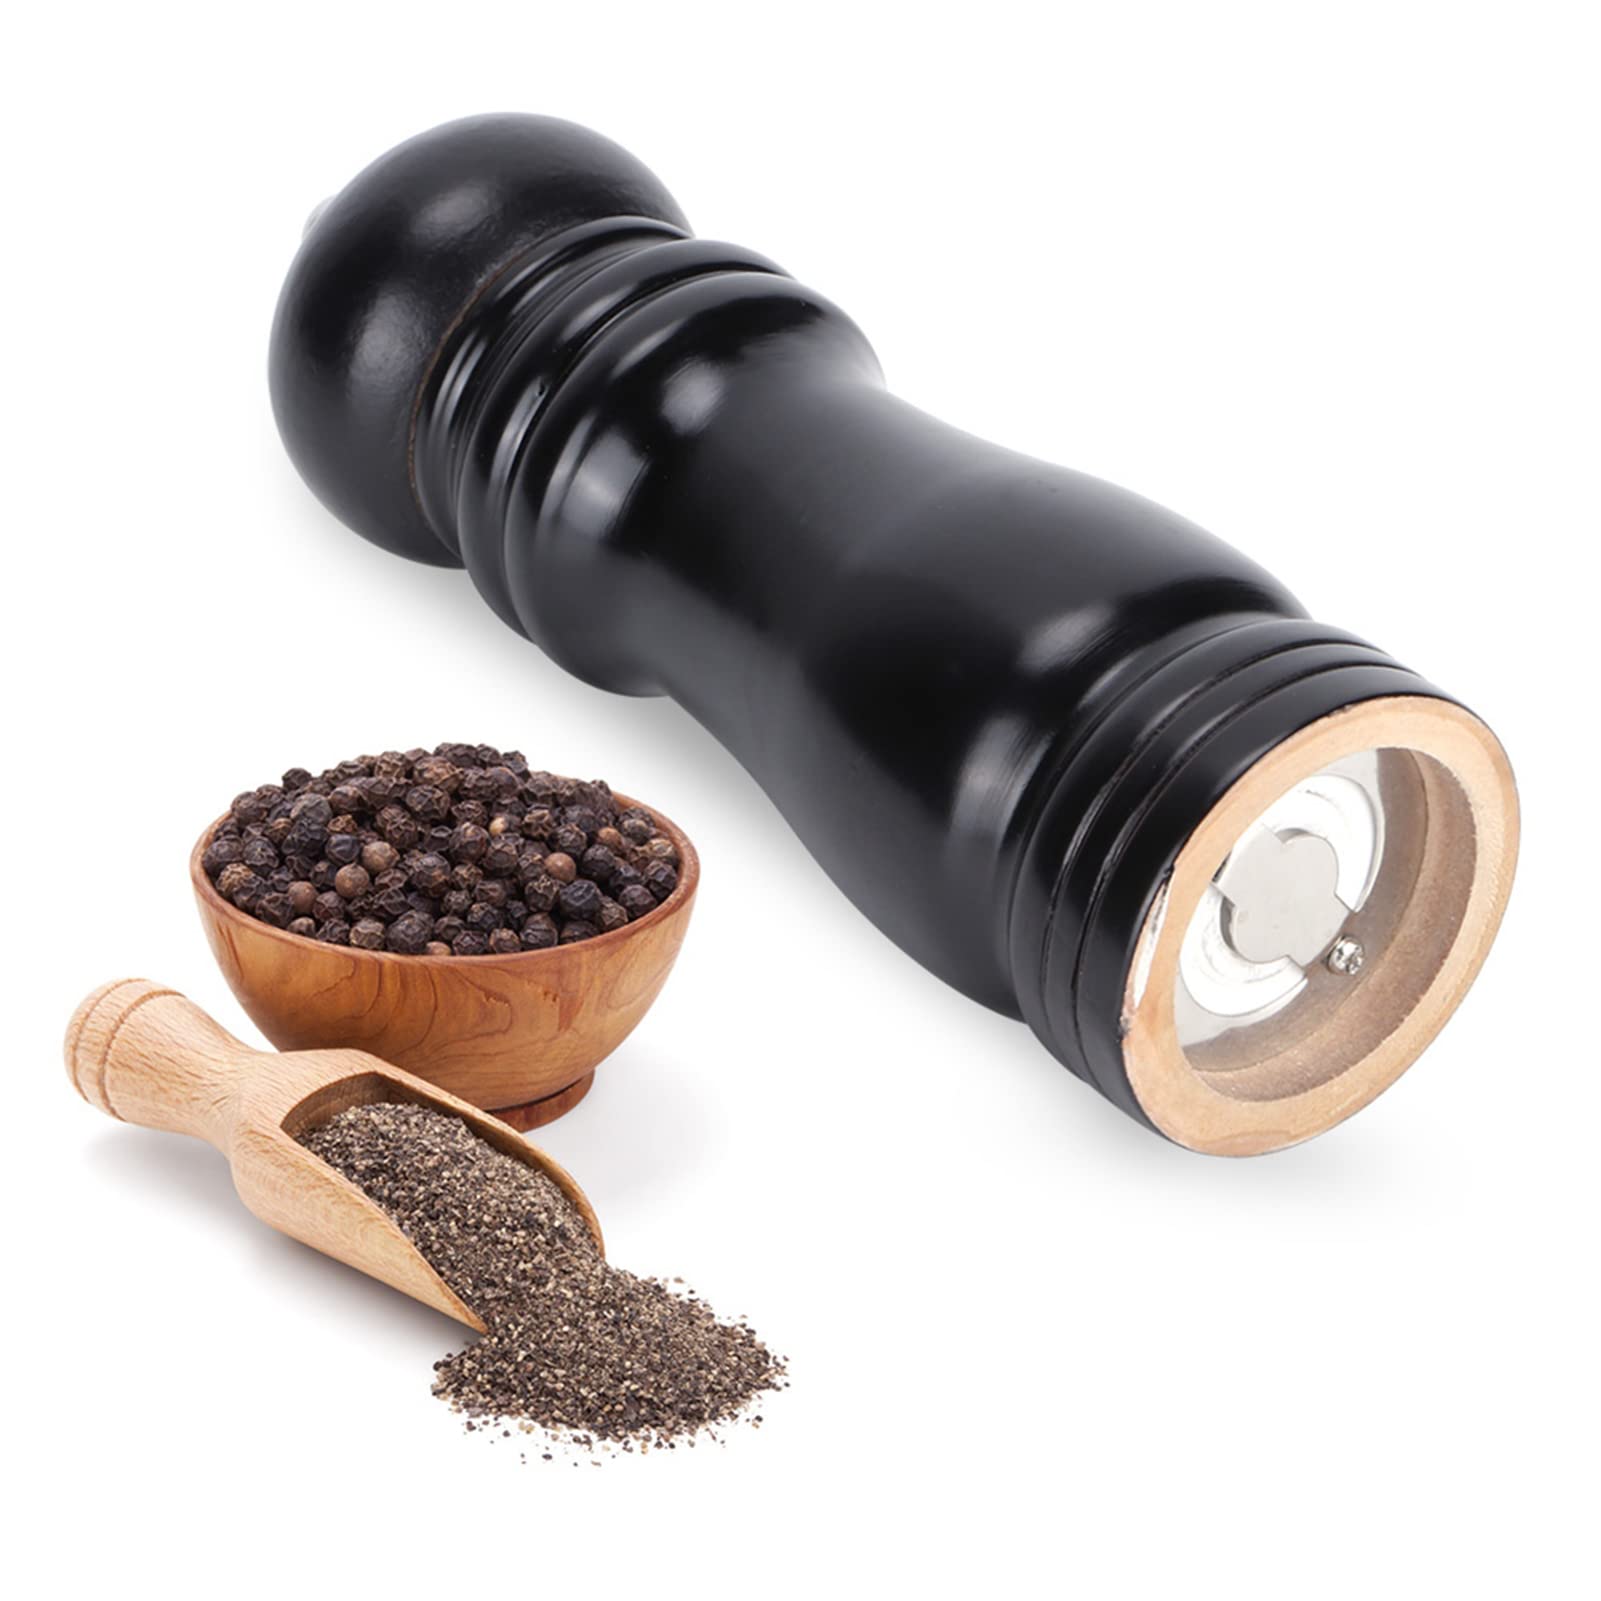 Wood Pepper Grinder Pepper Mill, 6 inch Durable Manual Pepper Mill with Adjustable Upper Knob, Ergonomic Pepper Mill for Home Kitchens, Restaurants, Hotels